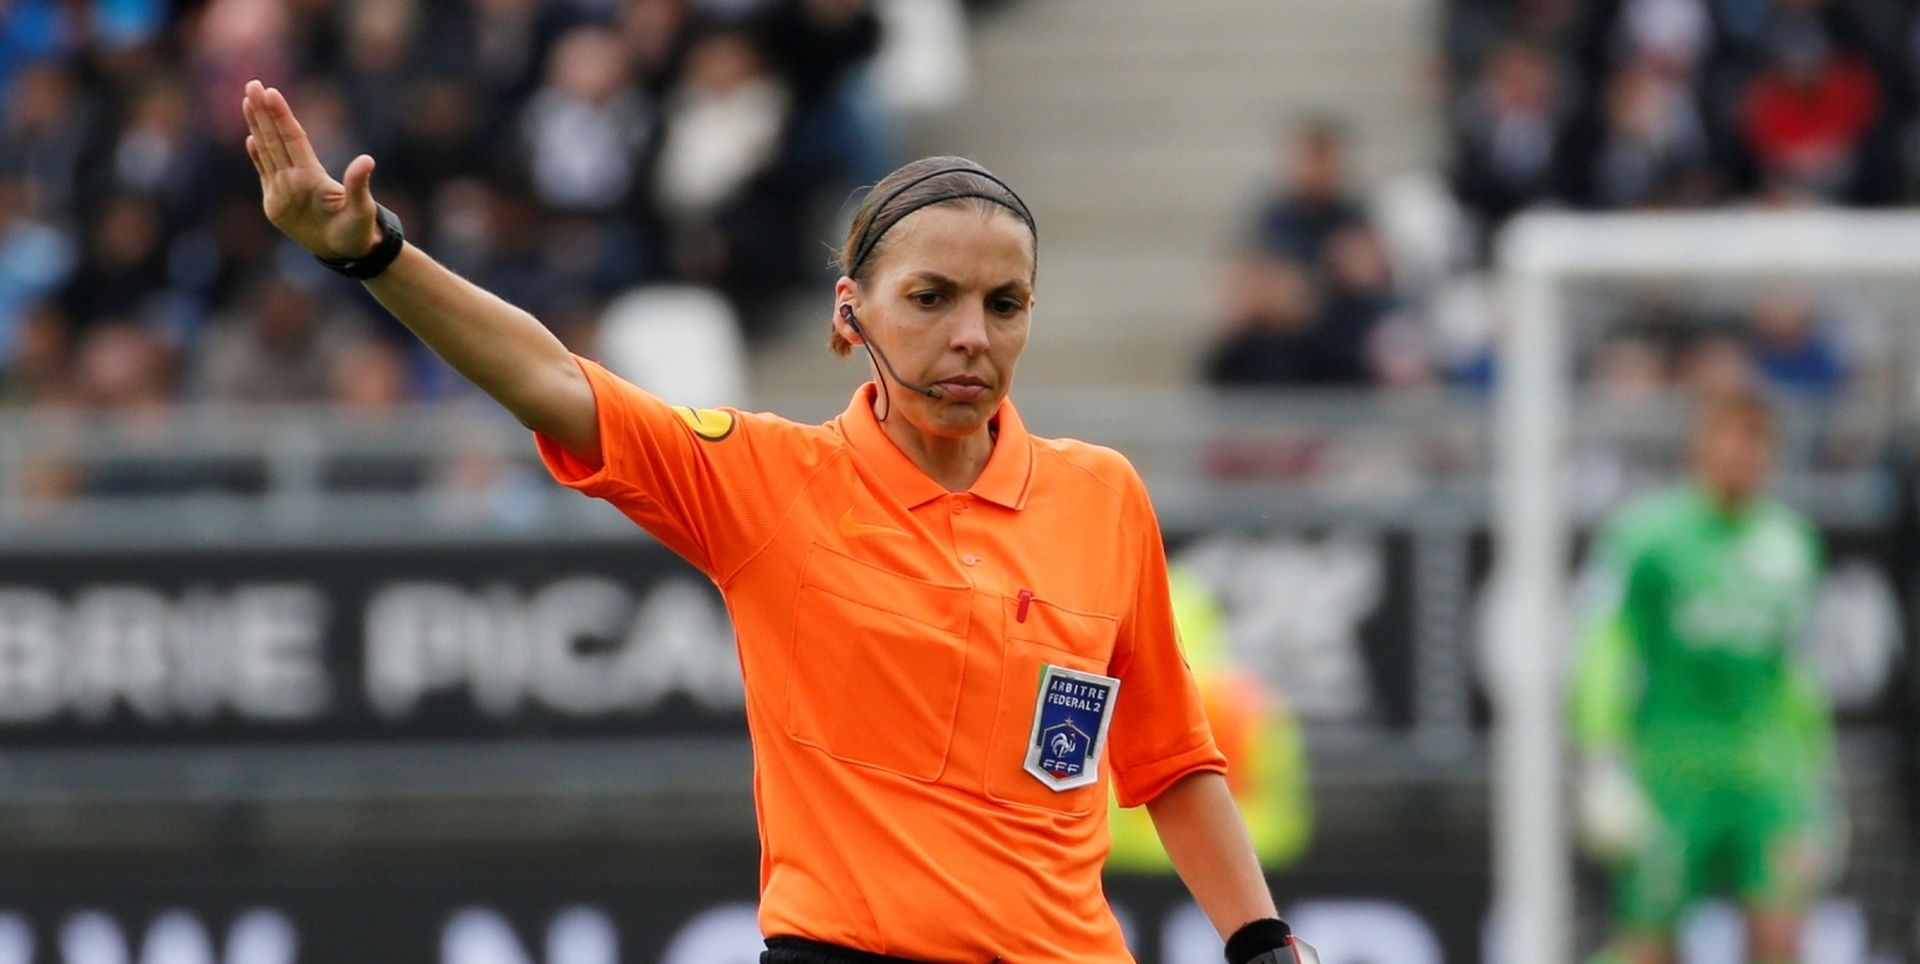 Ligue 1 - Amiens SC v RC Strasbourg Soccer Football - Ligue 1 - Amiens SC v RC Strasbourg - Stade de la Licorne, Amiens, France - April 28, 2019  Referee Stephanie Frappart gestures during the match    REUTERS/Pascal Rossignol PASCAL ROSSIGNOL